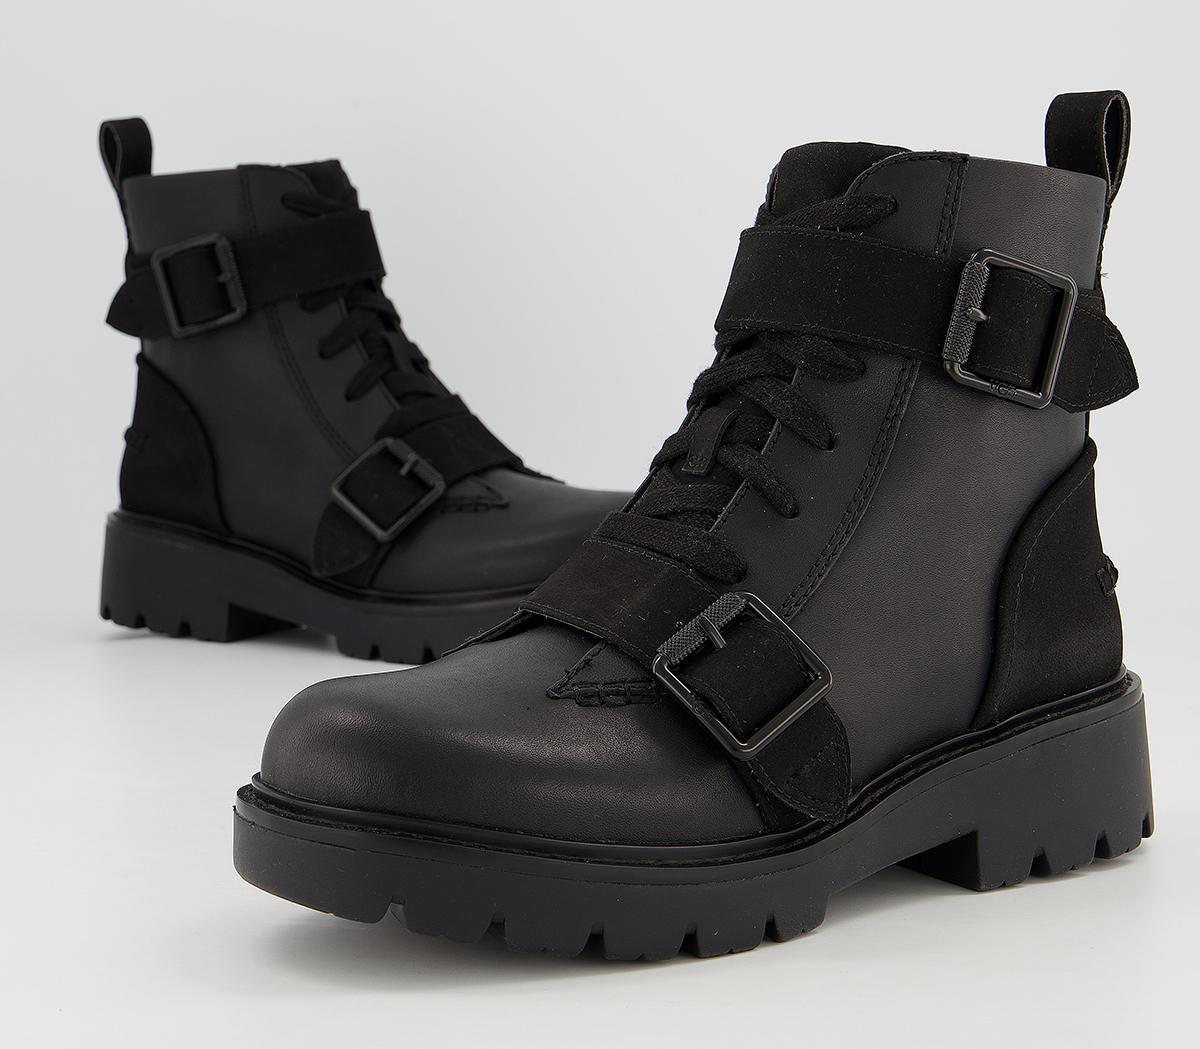 UGG Noe Boots Black - Women's Ankle Boots